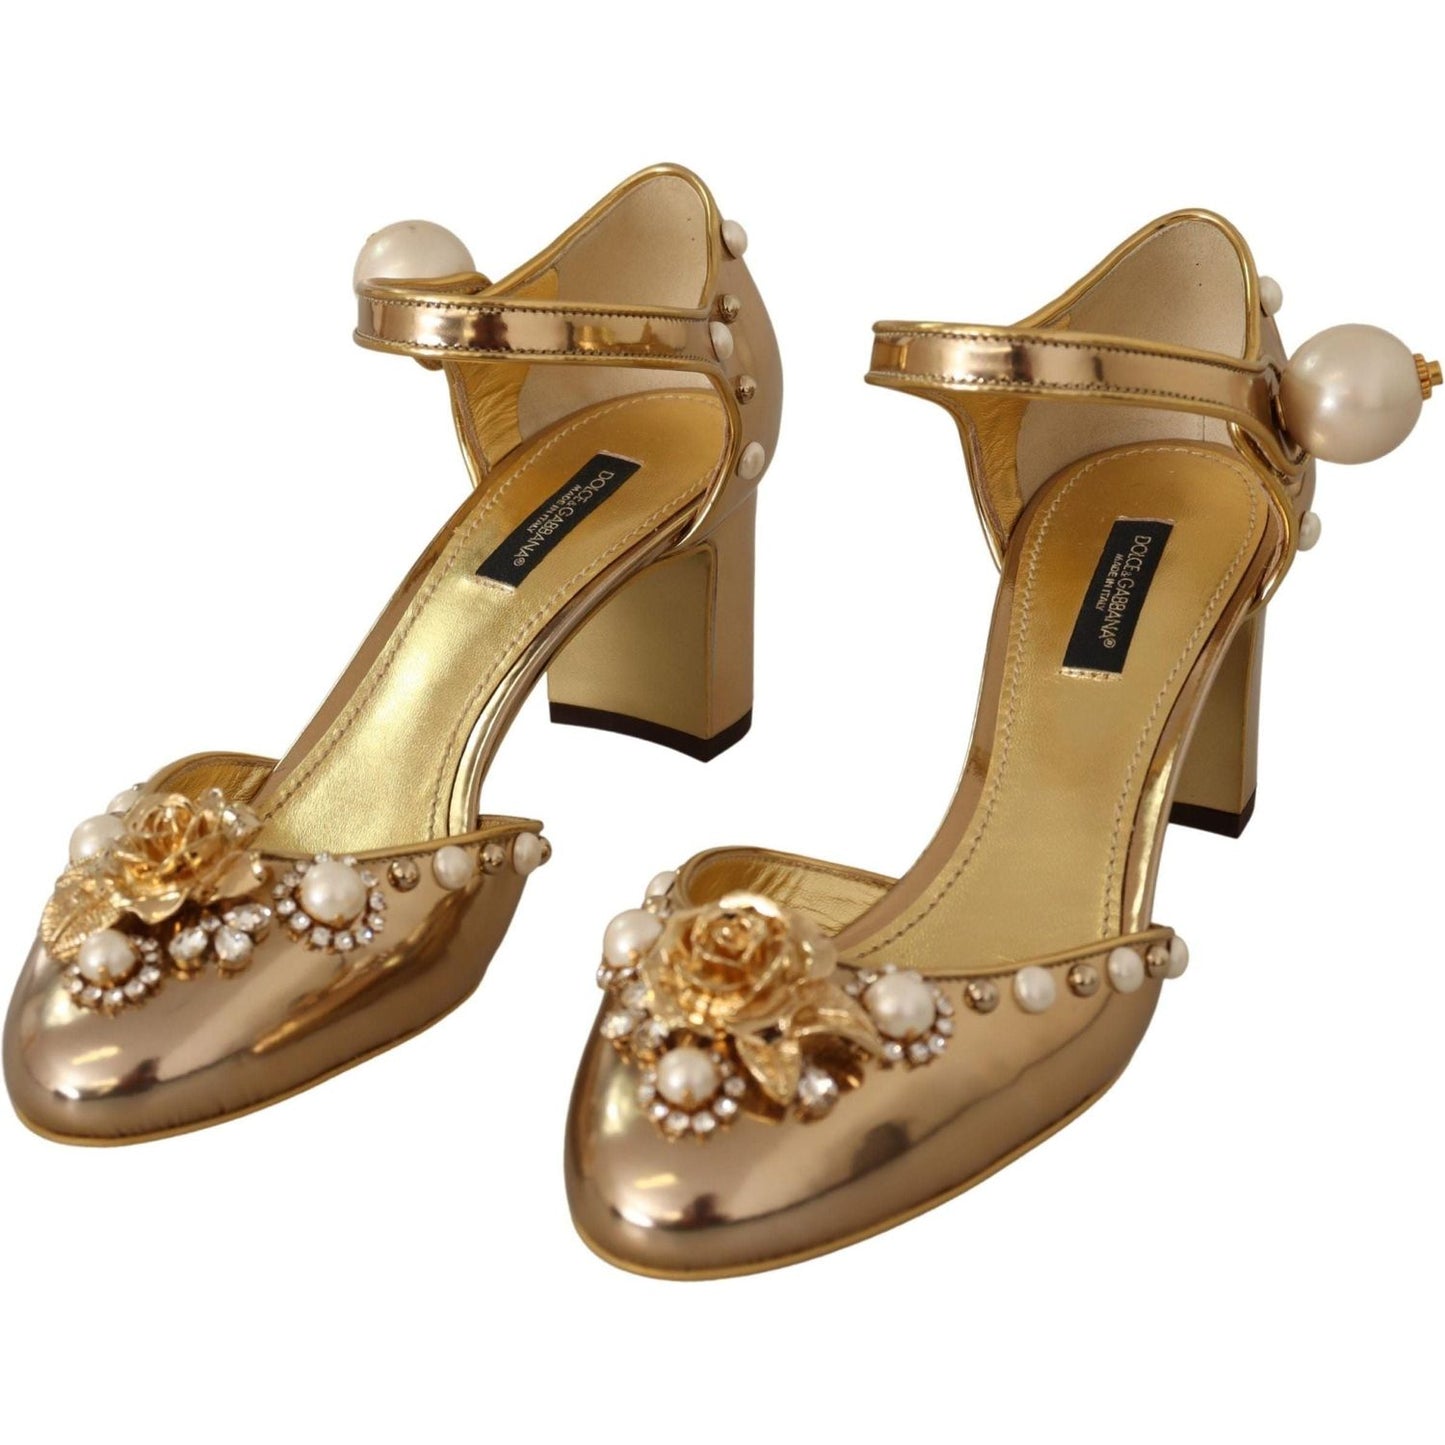 Dolce & Gabbana Elegant Gold Leather Block Heels with Crystals gold-leather-studded-crystal-ankle-strap-shoes IMG_6004-scaled-cb22d21b-05a.jpg